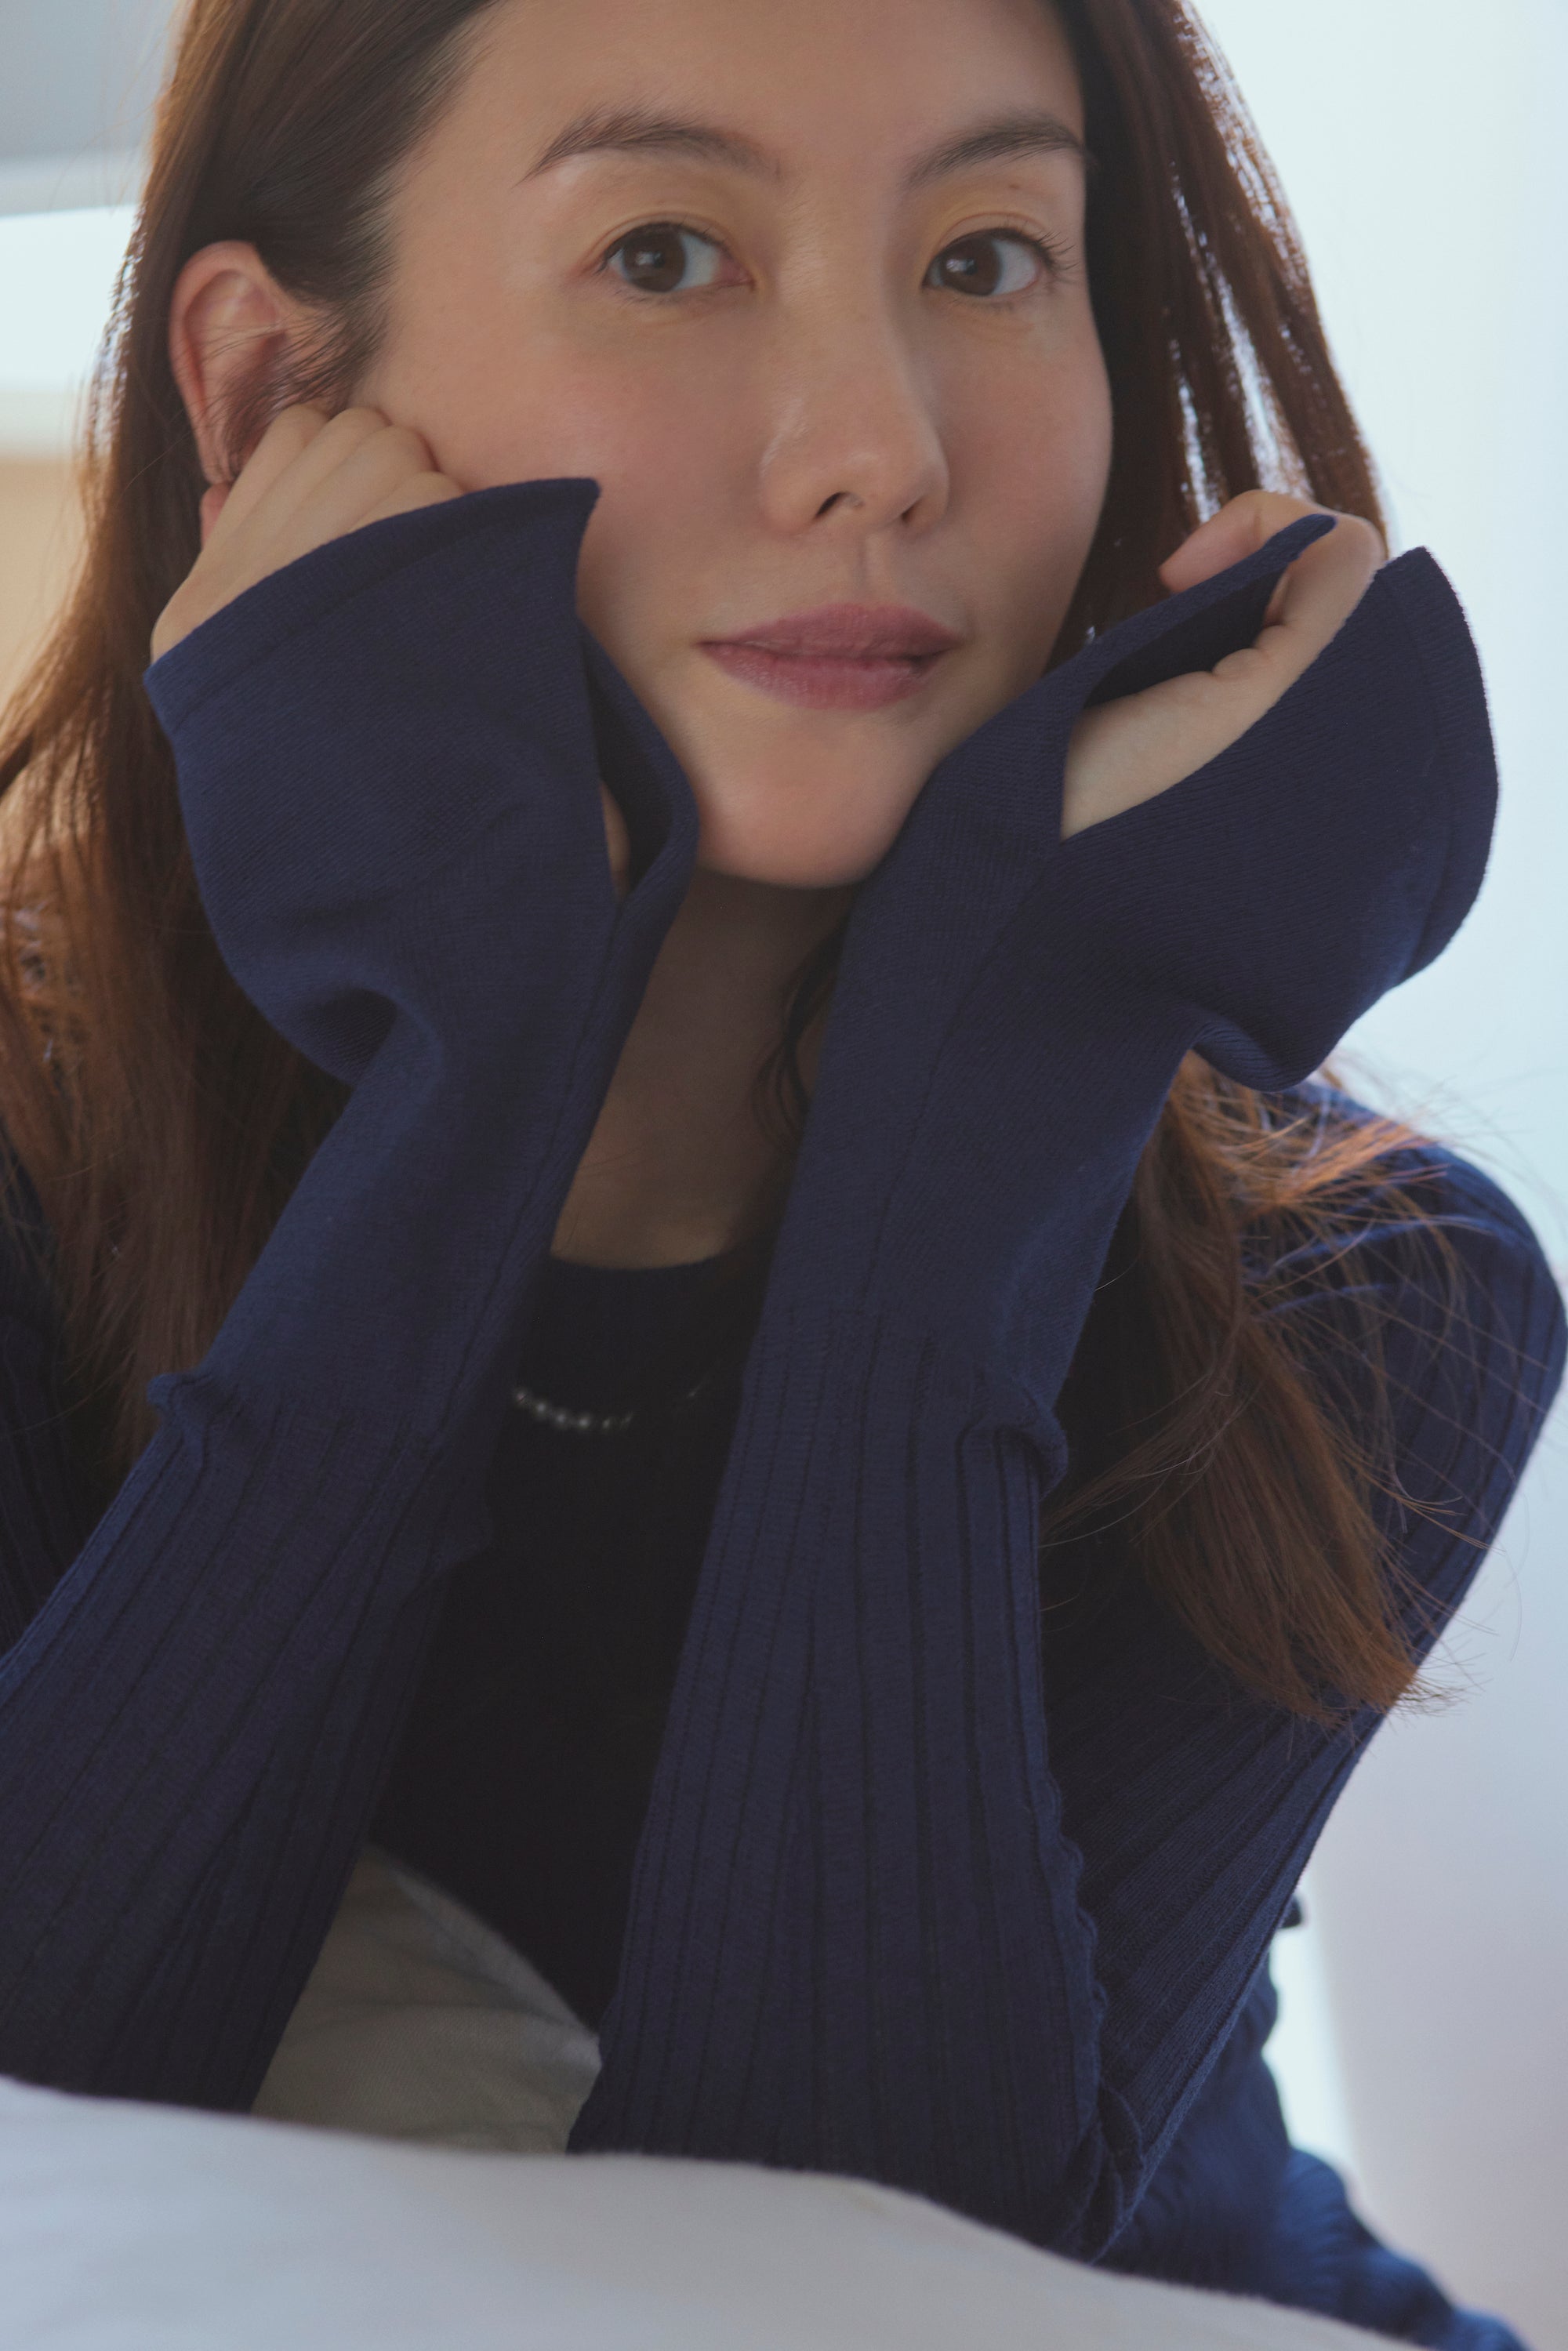 Lily Knit | MY WEAKNESS Official Site